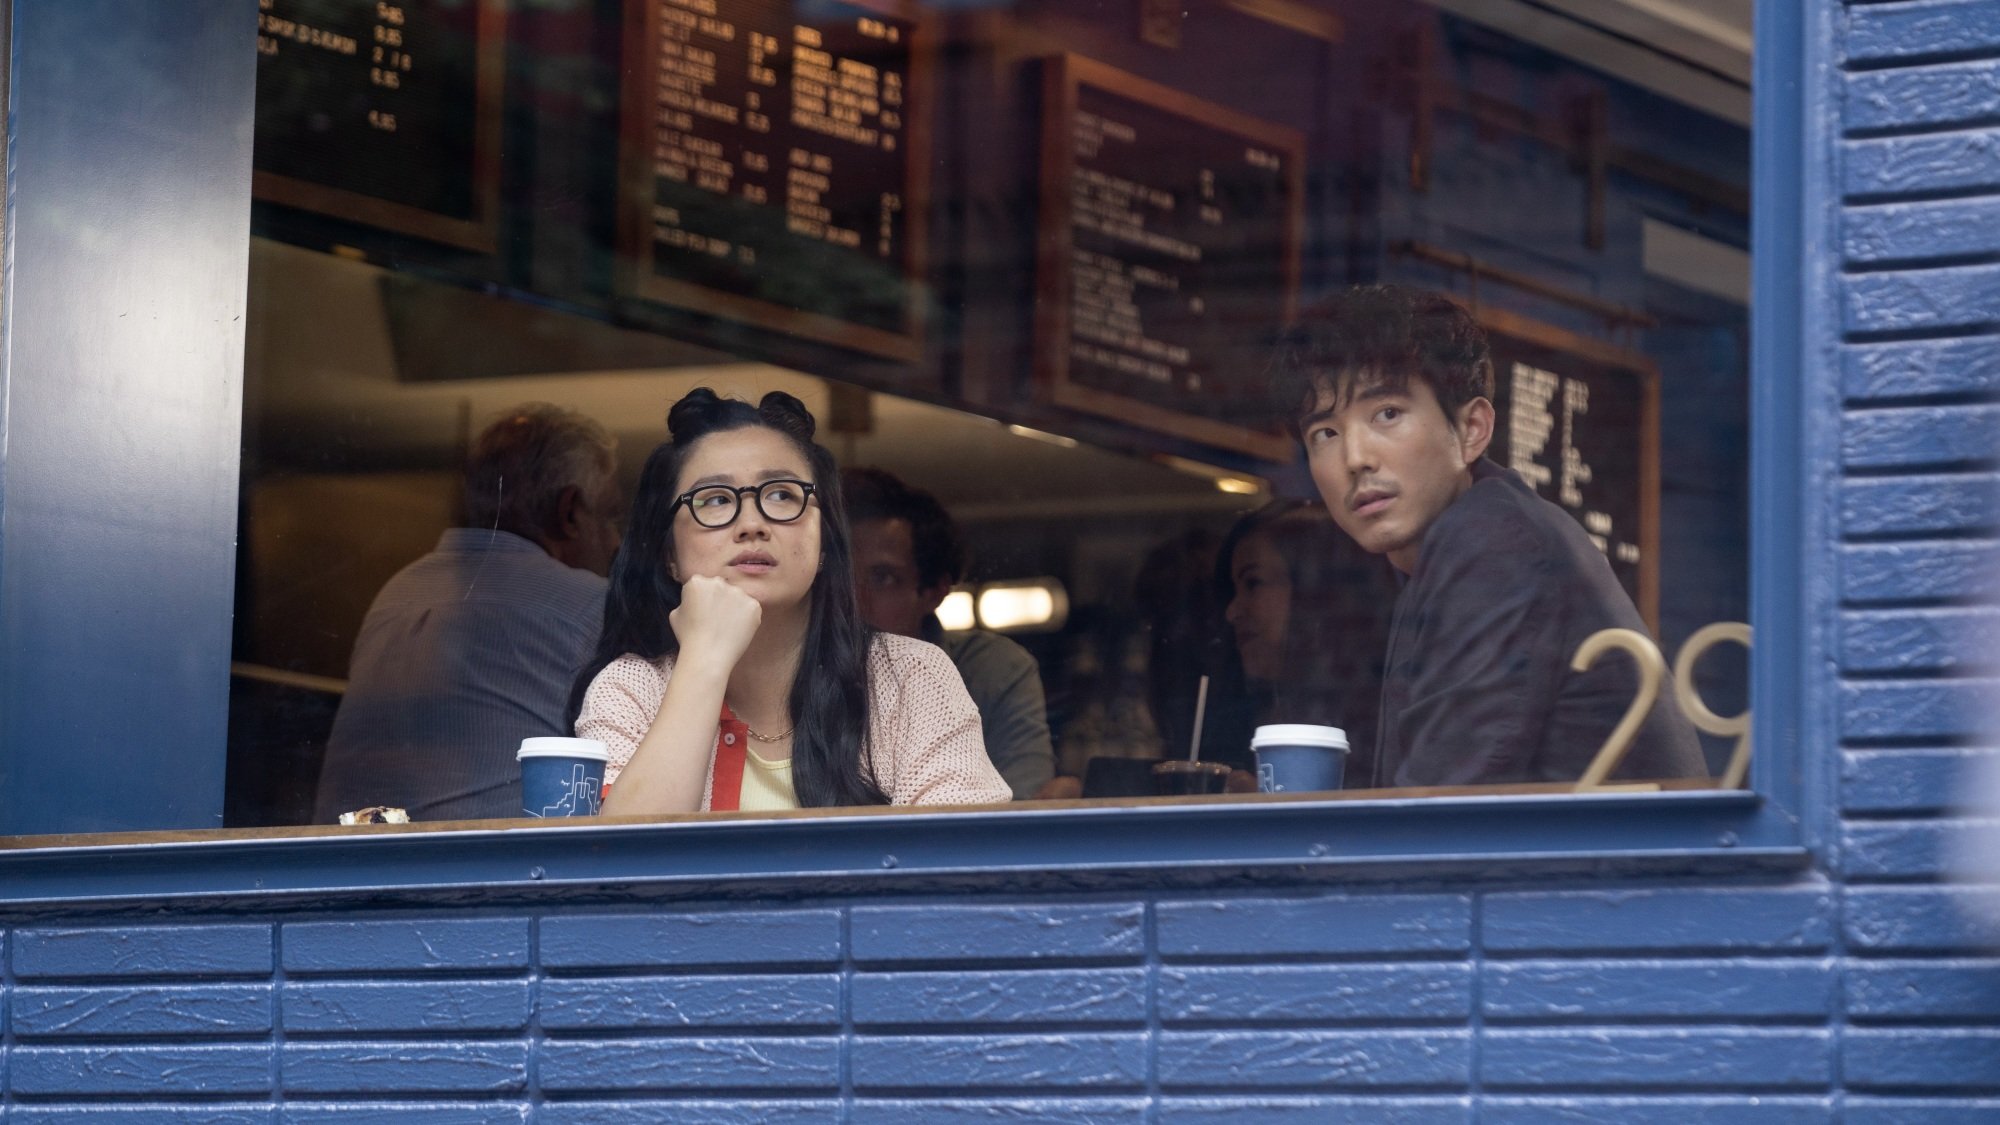 A man and woman look out the window of a coffee shop with a blue brick exterior.